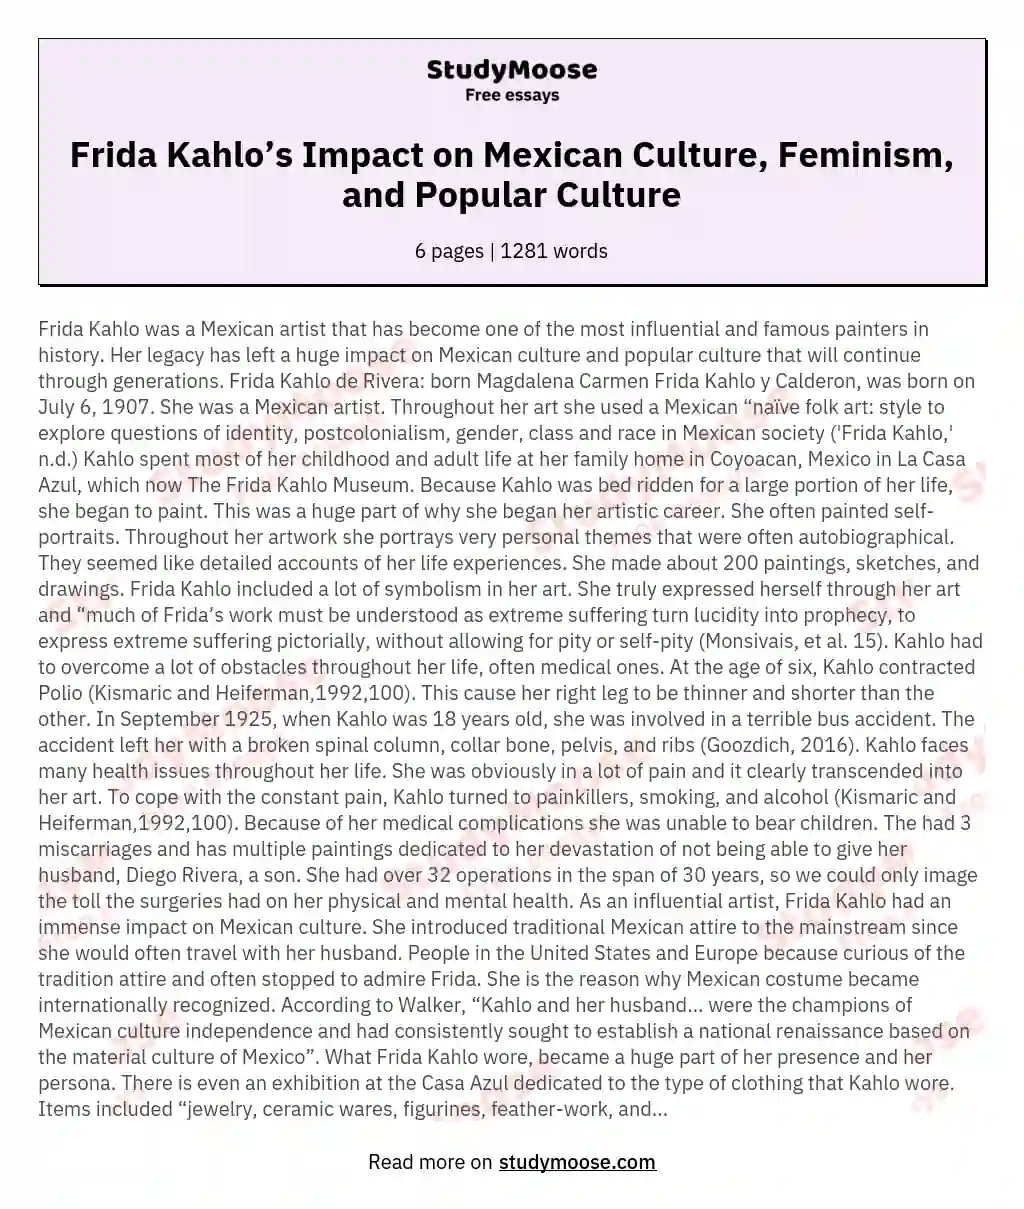 Frida Kahlo’s Impact on Mexican Culture, Feminism, and Popular Culture